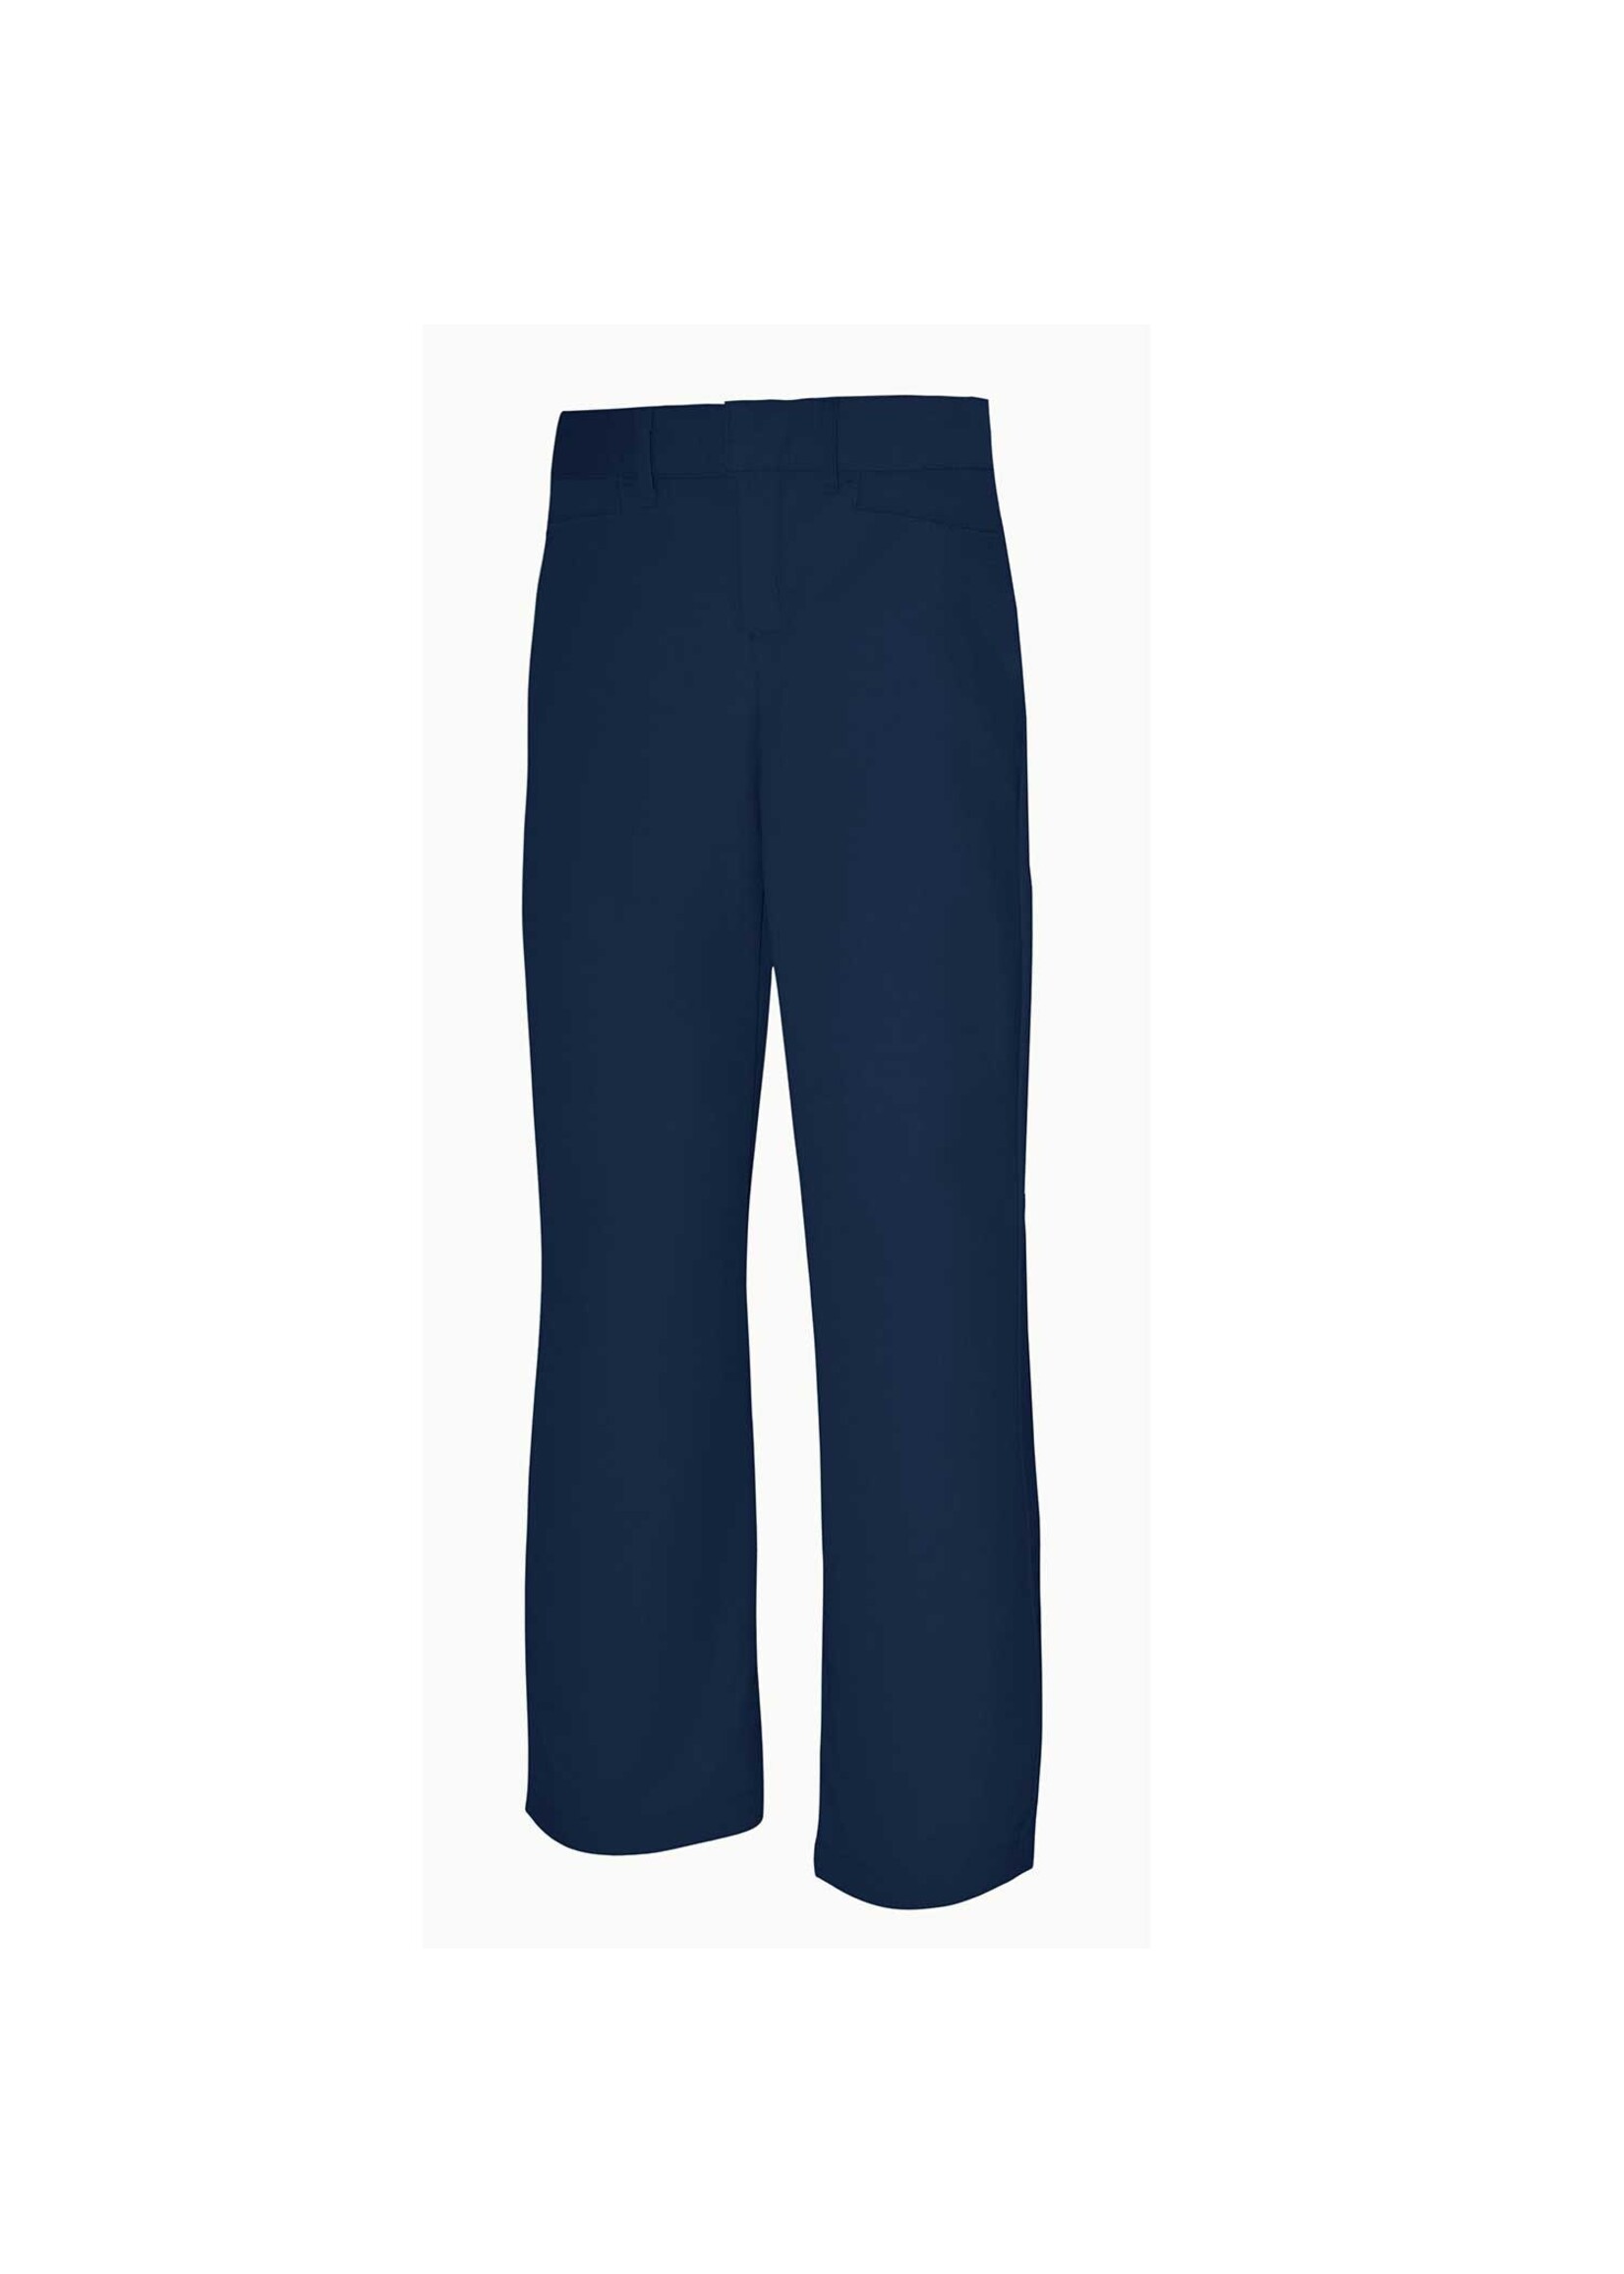 Girls Mid Rise Flat Front Pant KN with logo